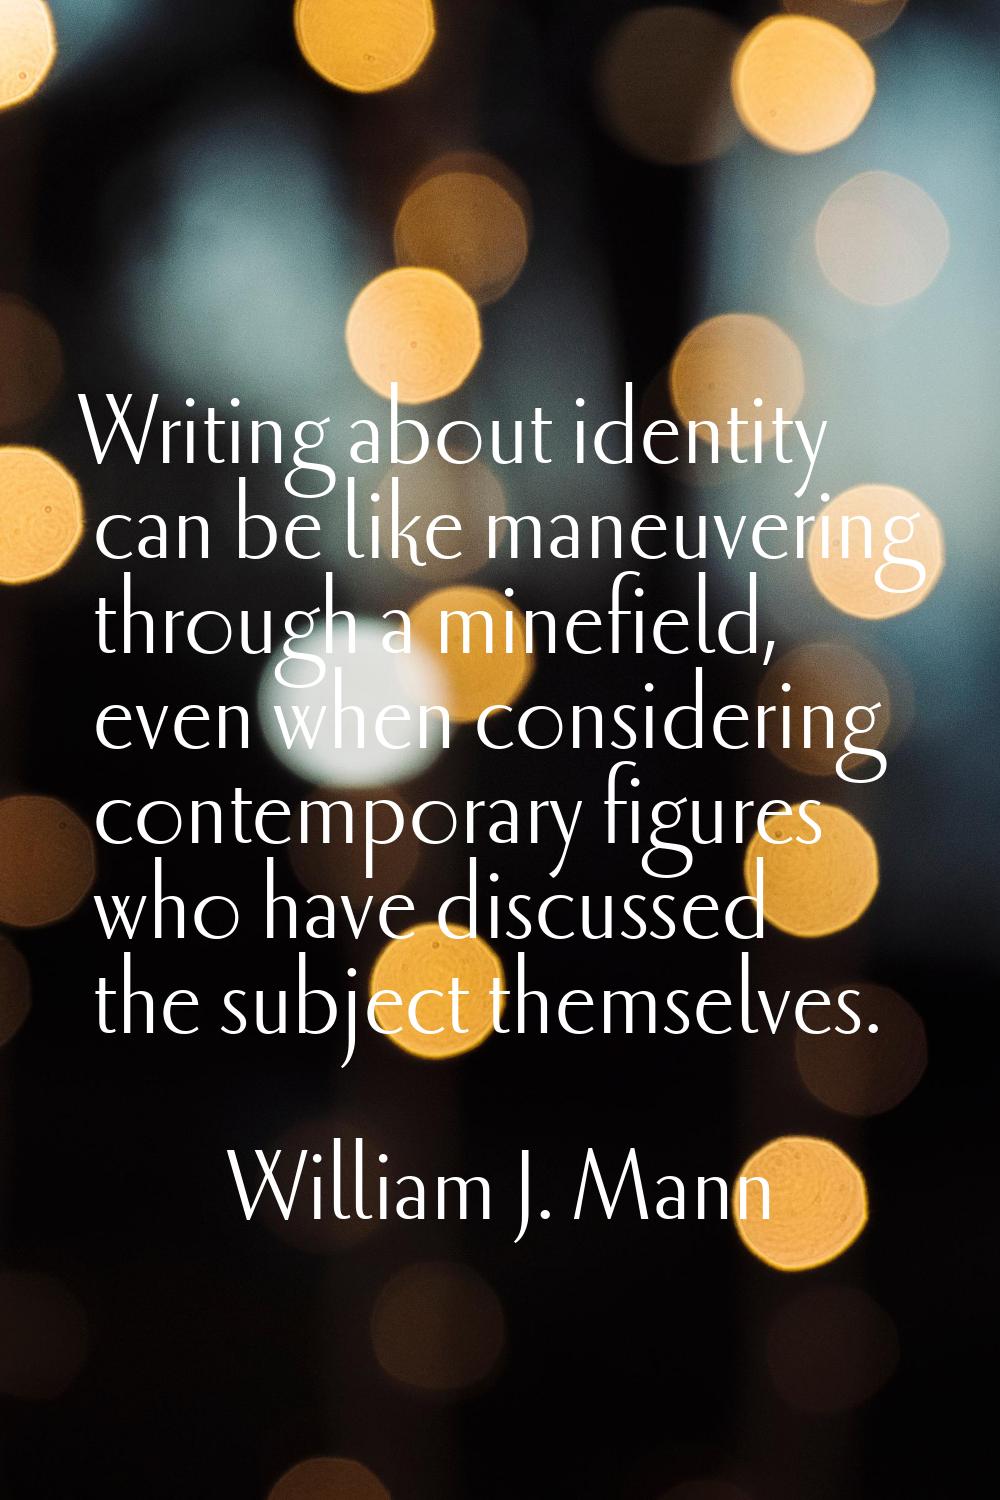 Writing about identity can be like maneuvering through a minefield, even when considering contempor